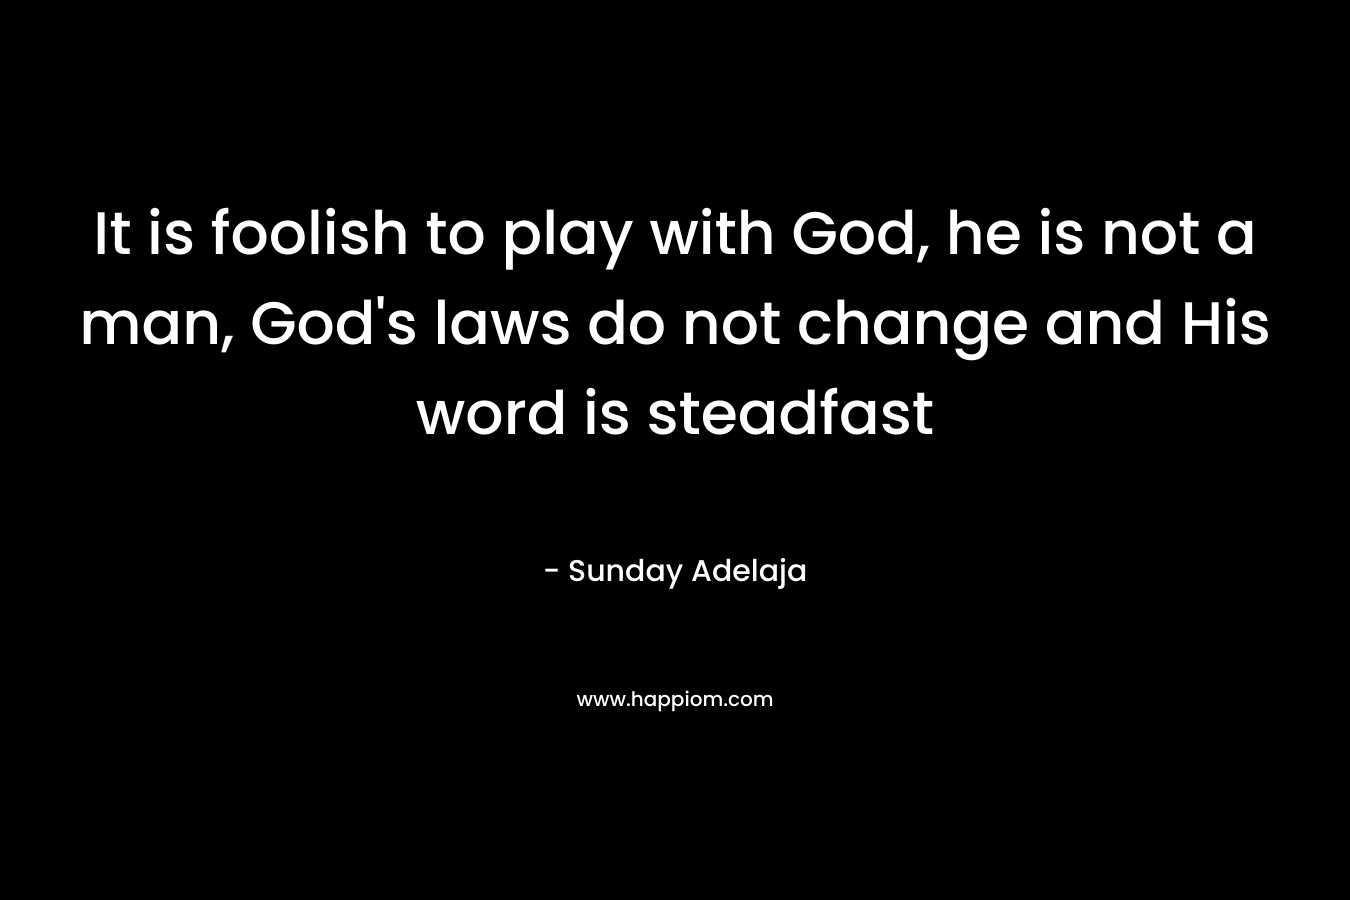 It is foolish to play with God, he is not a man, God's laws do not change and His word is steadfast